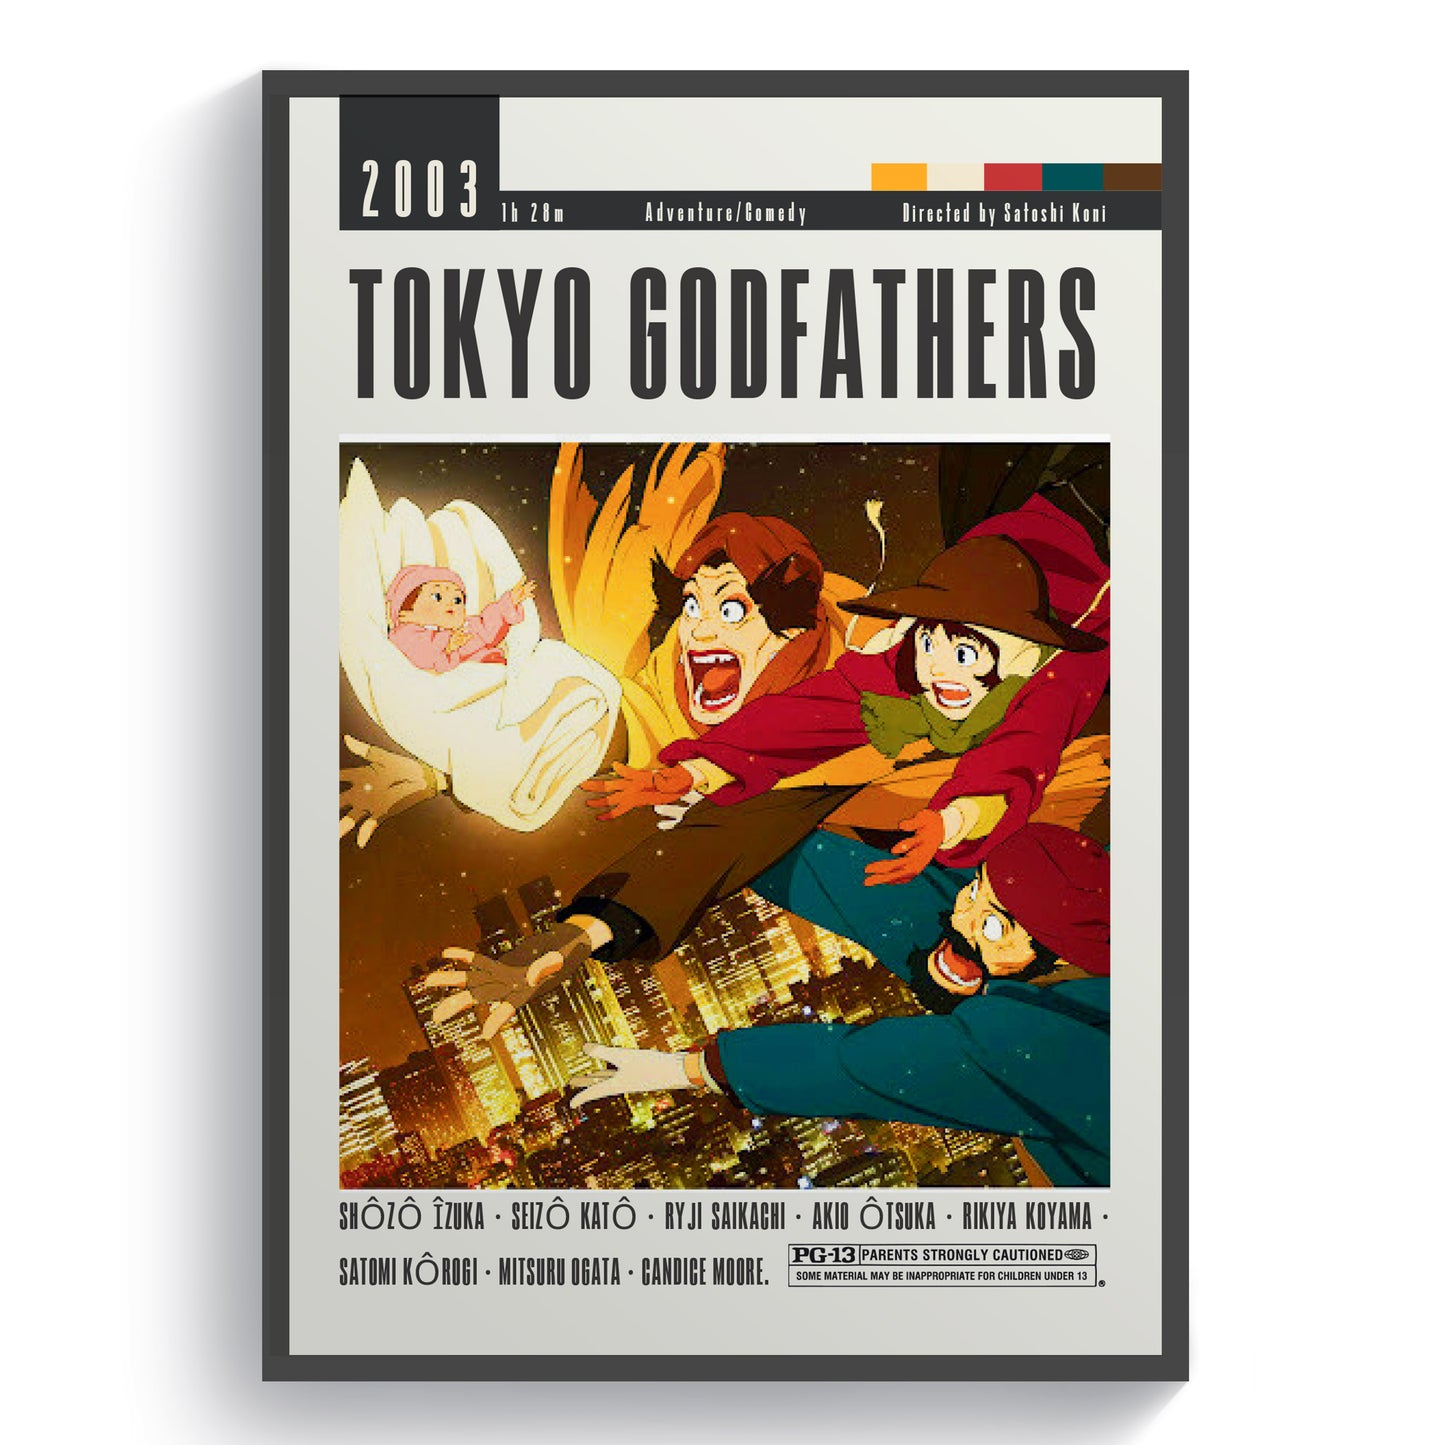 Discover the beloved classic, Tokyo Godfathers Movie. Featuring stunning and detailed Anime Film Posters, immerse yourself in this heartwarming and timeless film. With intricate illustrations and captivating visuals, experience the magic of Tokyo Godfathers. A must-see for any anime fan.